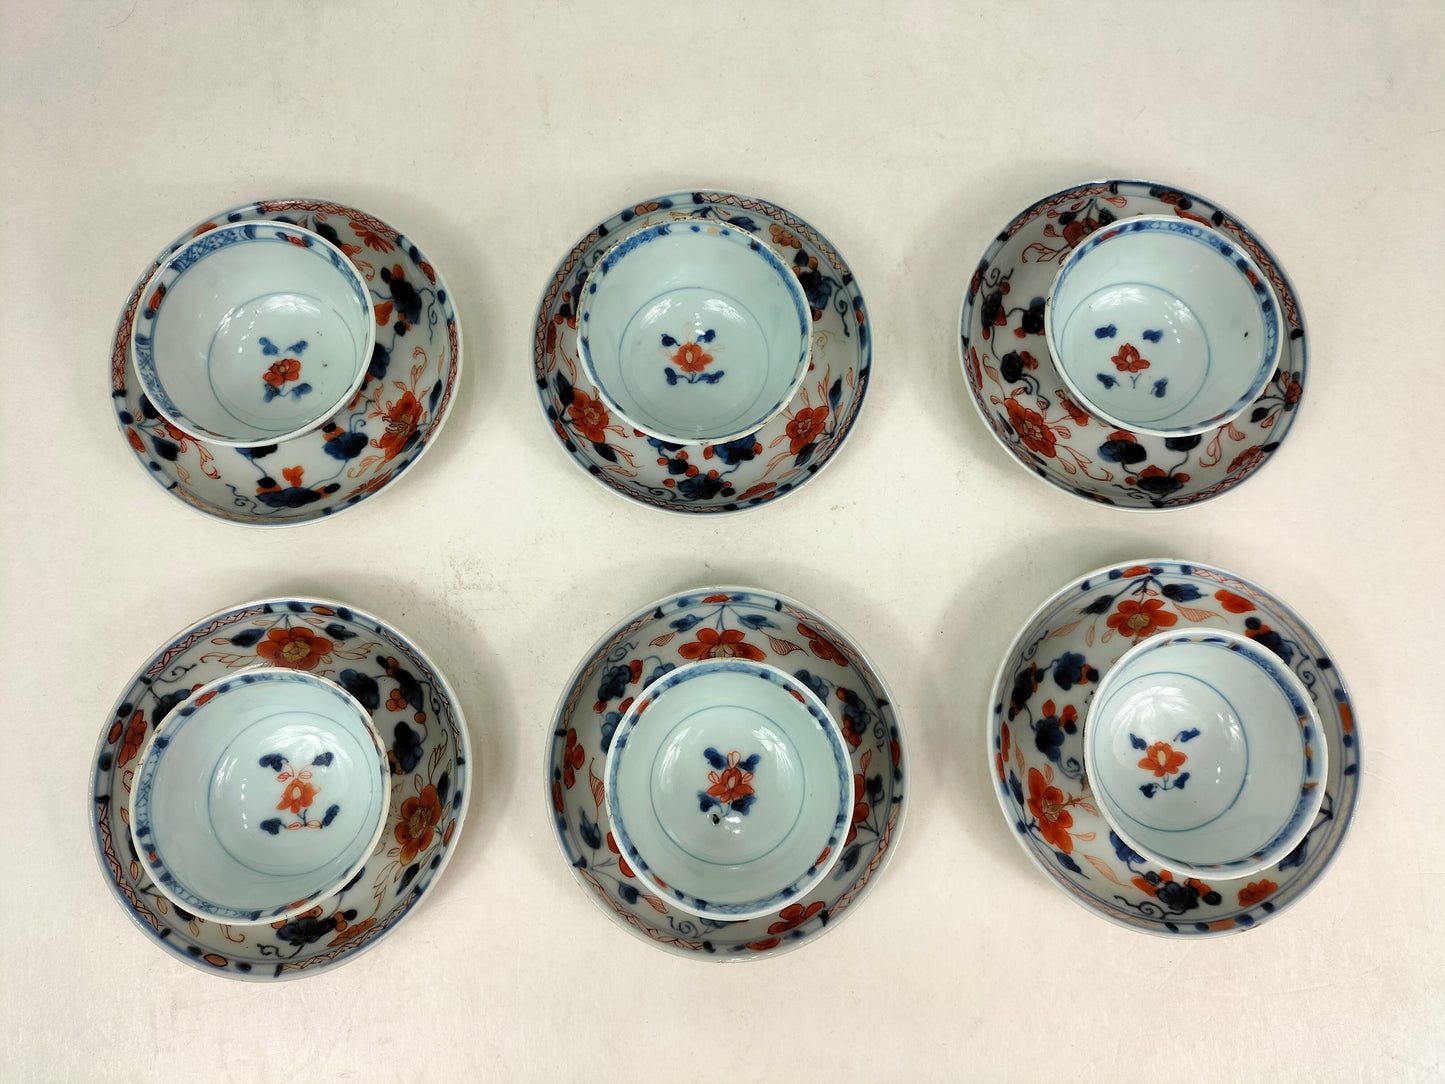 A set of 6 antique imari tea cups and saucers // Qing Dynasty - Kangxi - 18th century